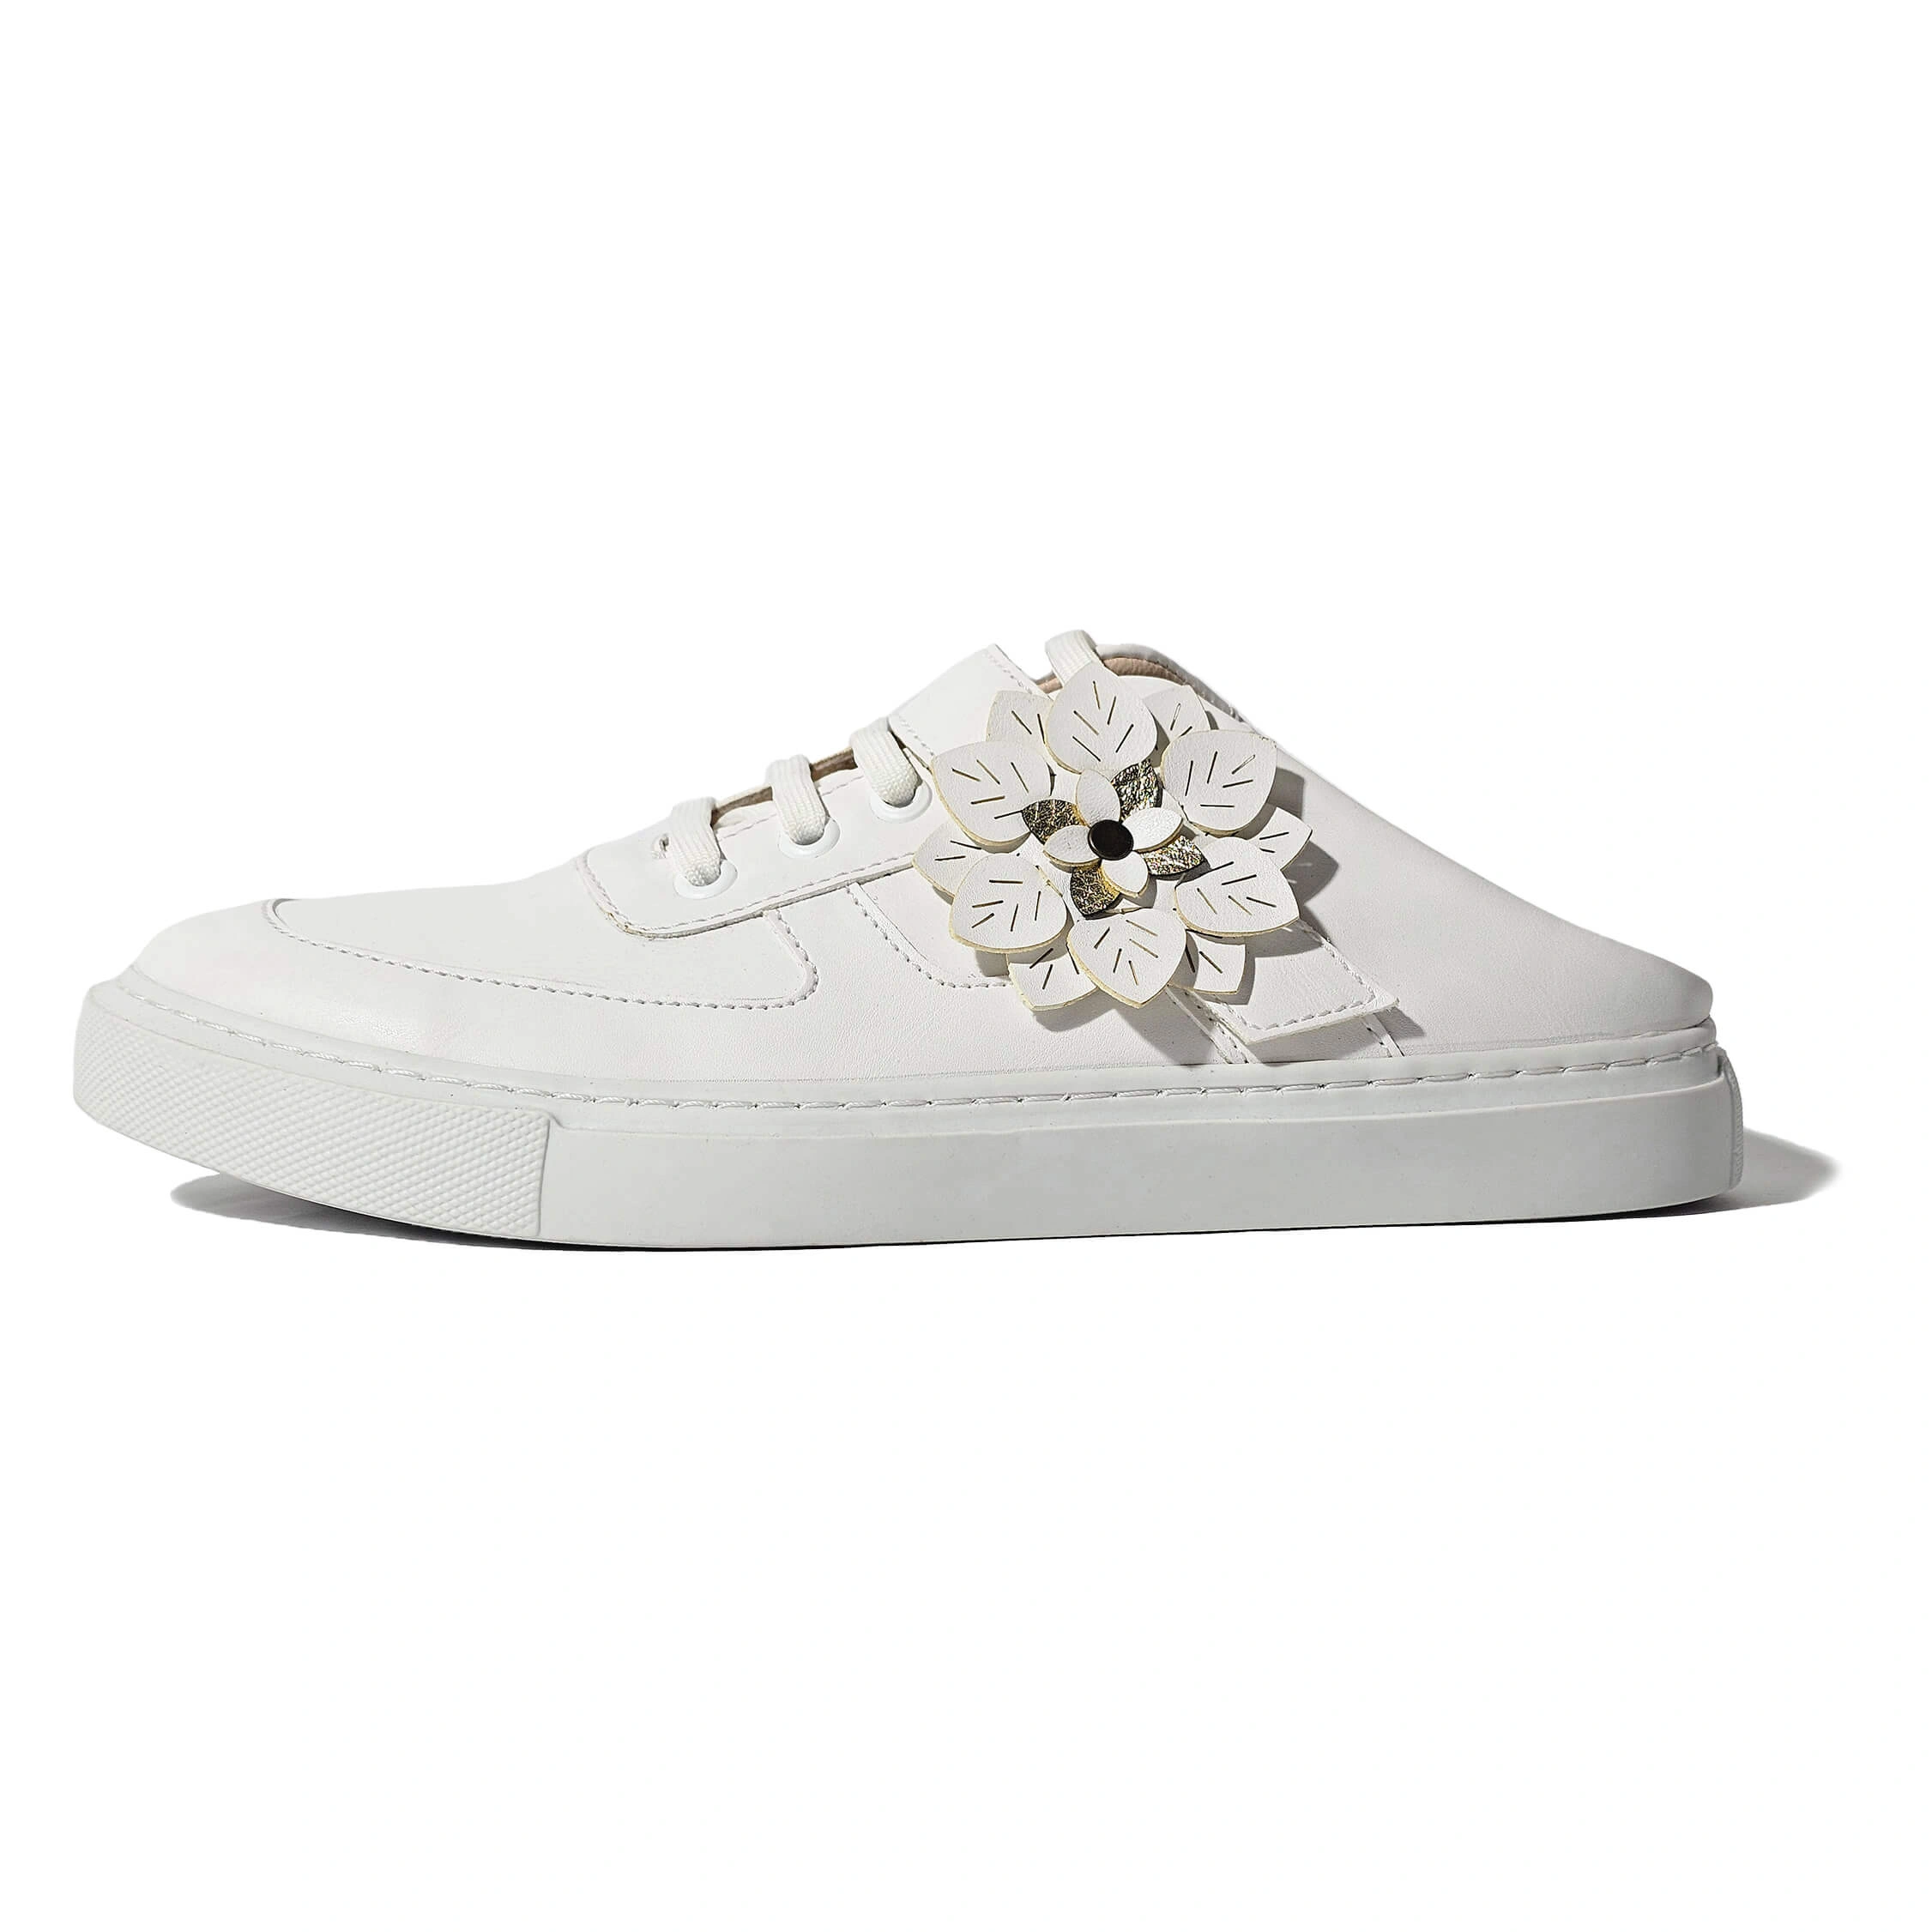 Sneakers-Sandale Blanche